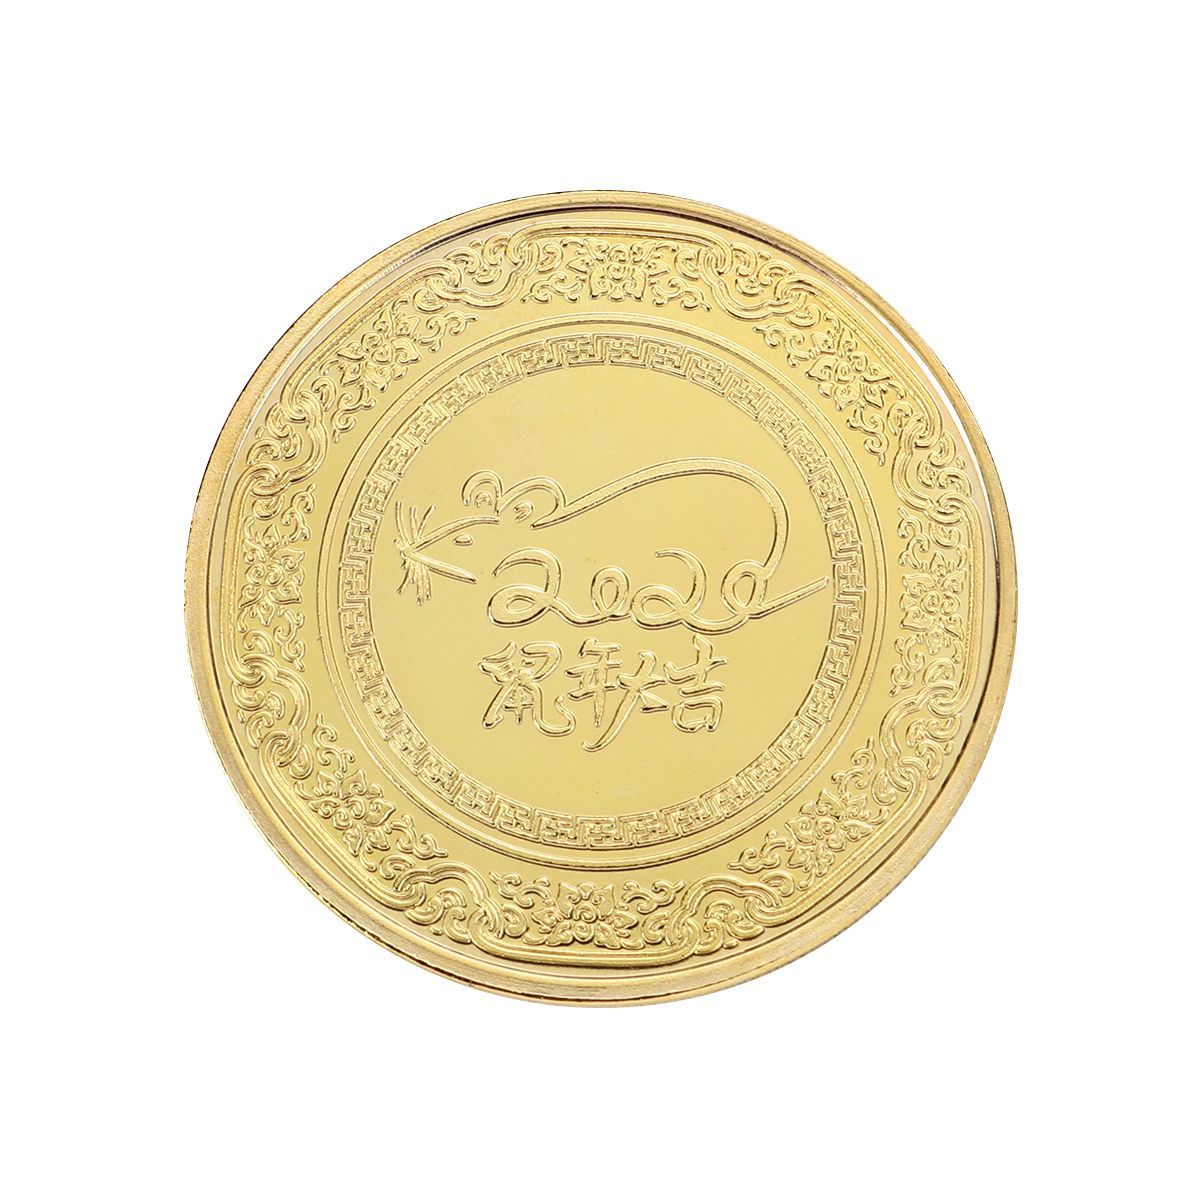 2020-Year-Of-Rat-Commemorative-Coin-SilverGold-Plated-Home-Non-currency-Coins-1651271